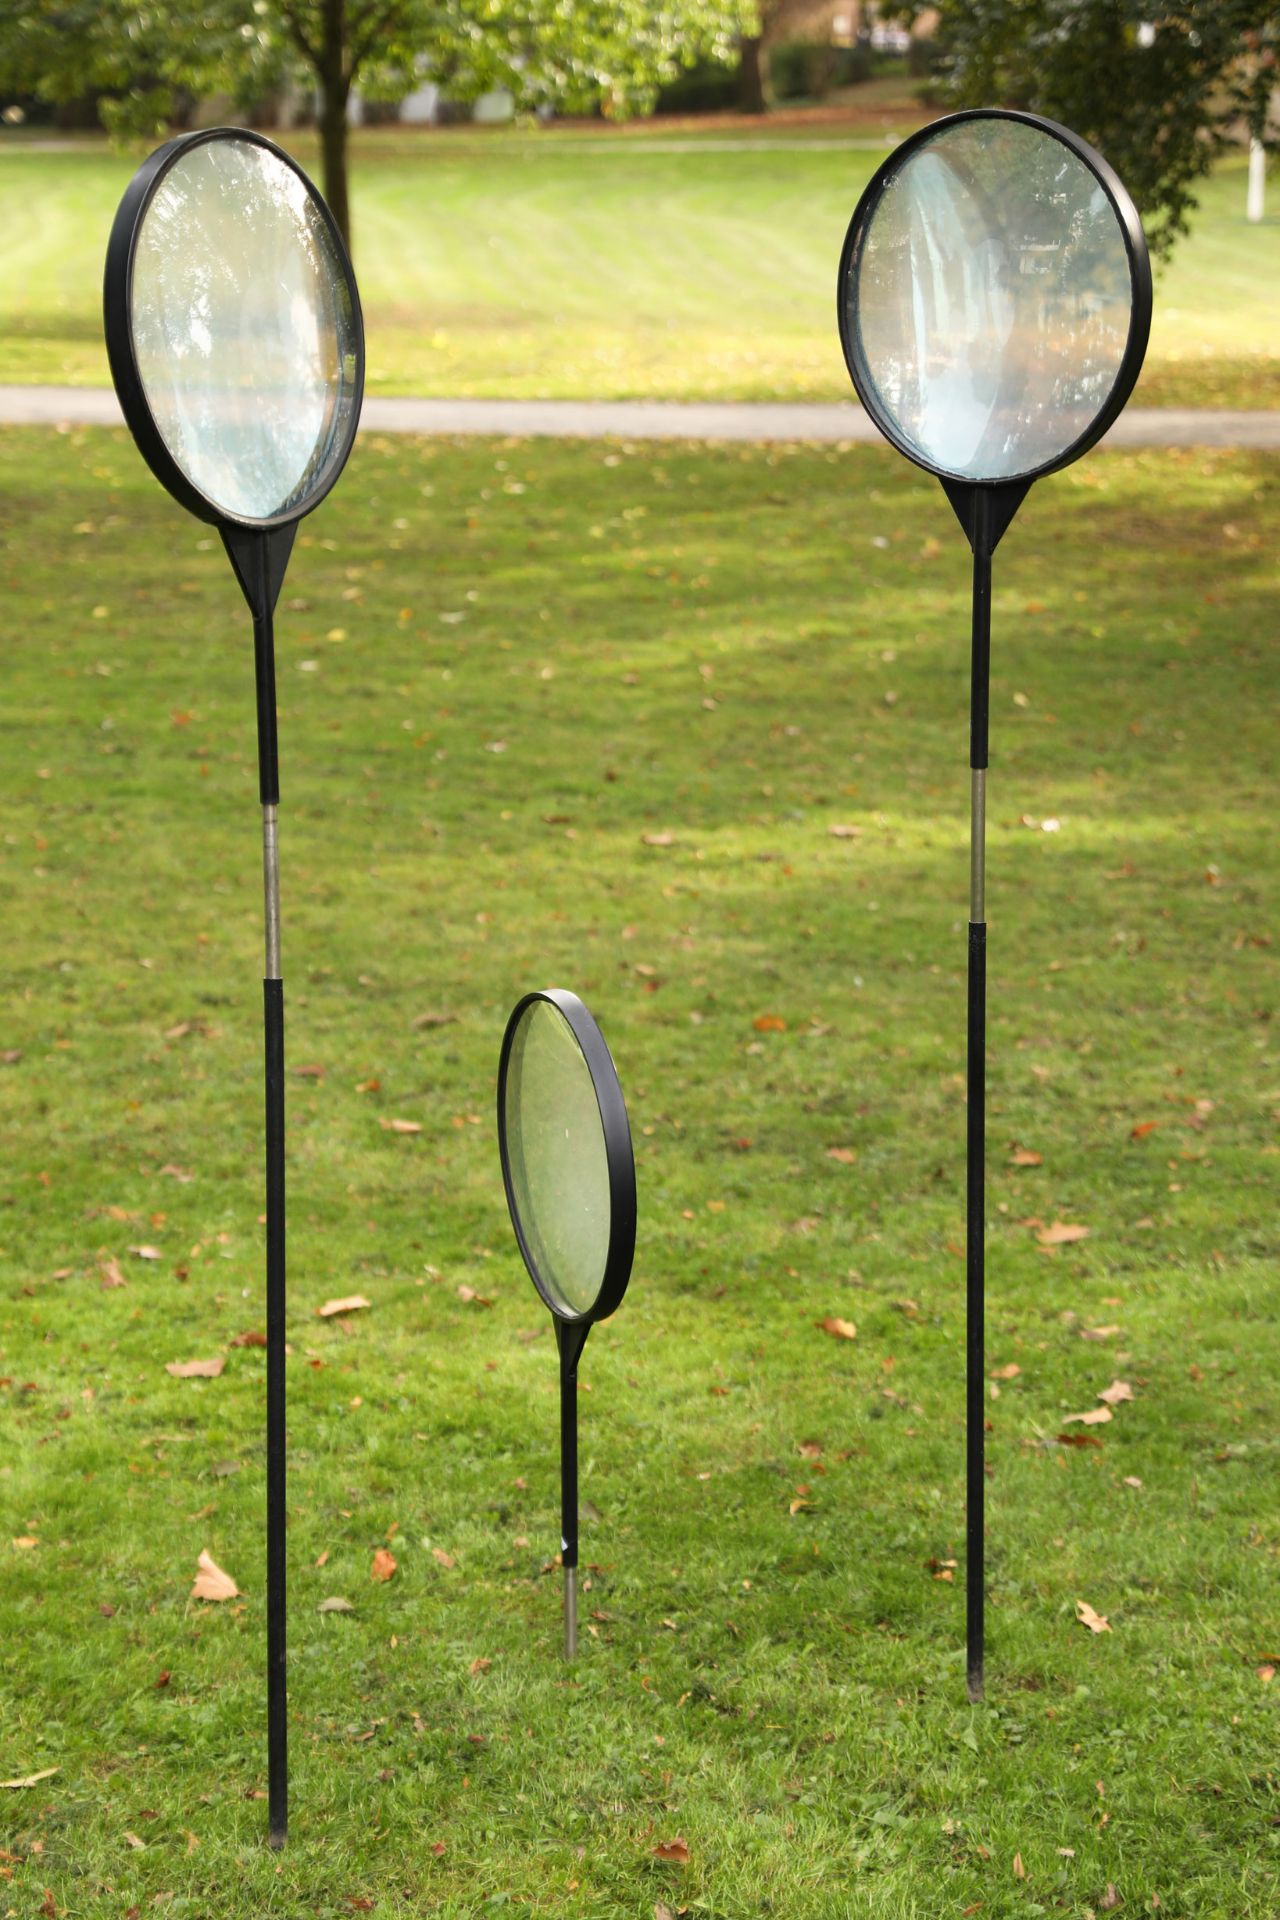 Adolf Luther*, 3 standing lenses for outdoor use, 1979 - Image 3 of 4